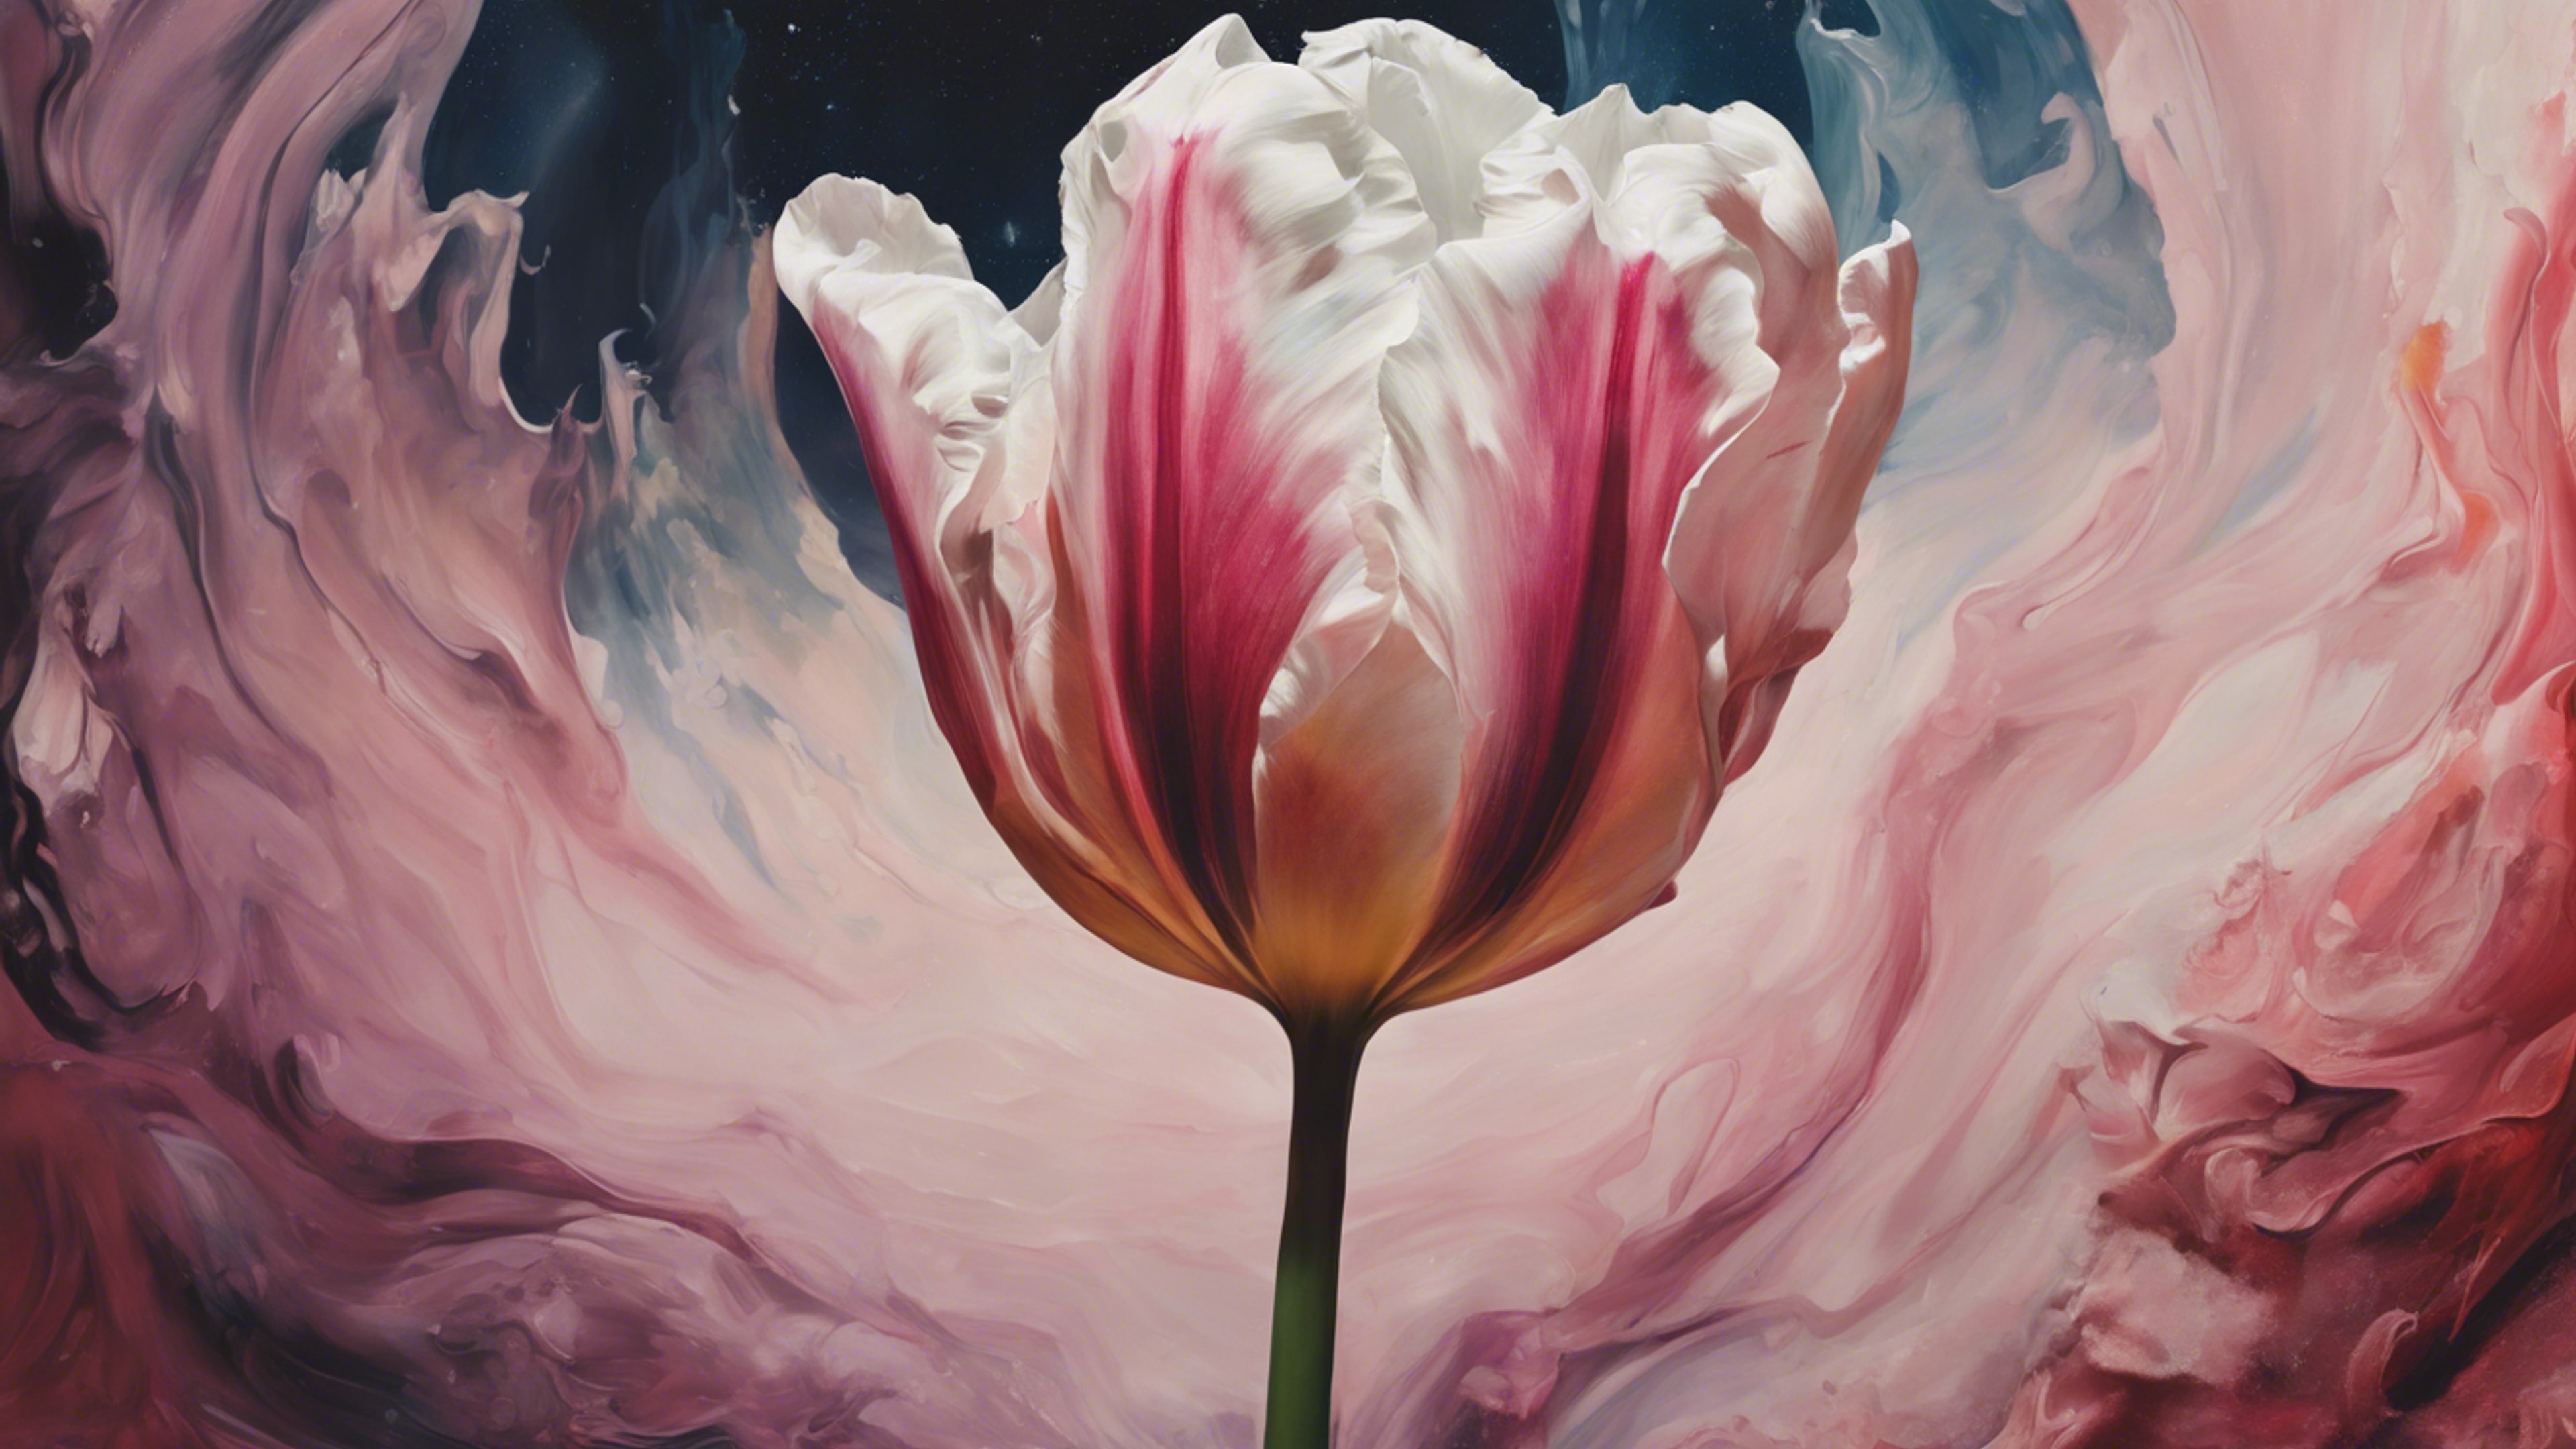 An abstract painting of a giant tulip enveloping the earth.壁紙[c0c0f1cada534397bf24]